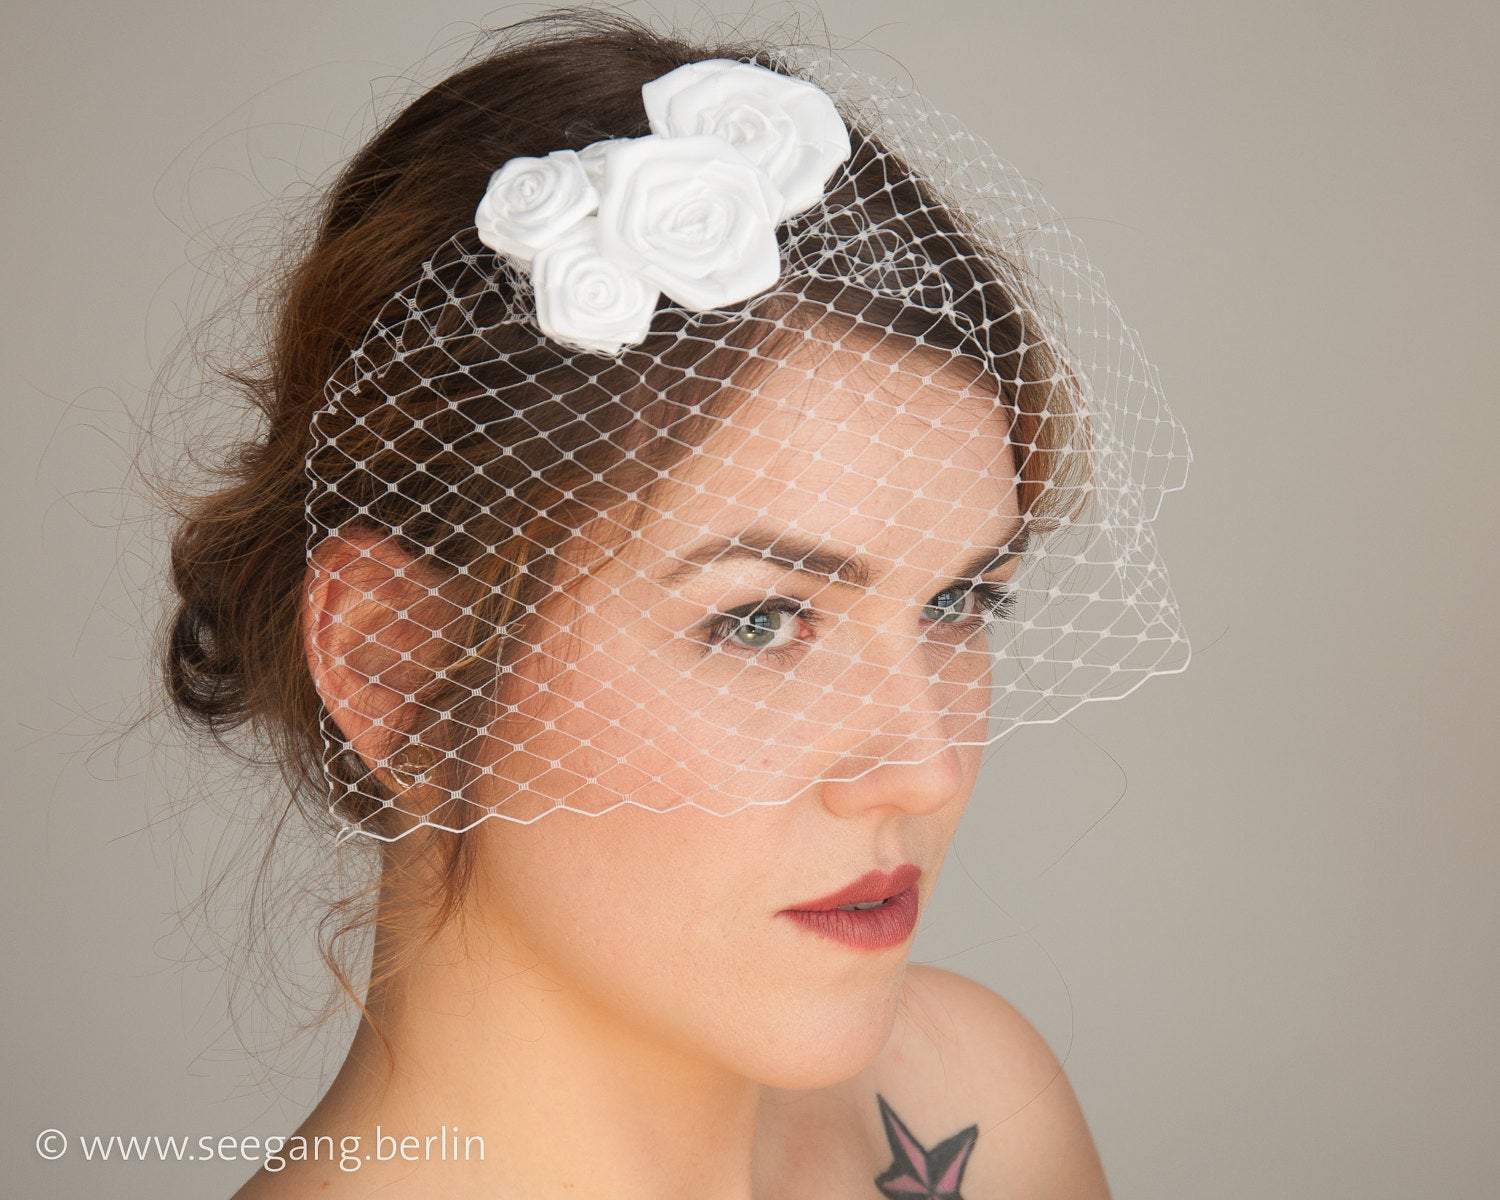 BIRDCAGE - BRIDAL VEIL HEADDRESS WITH ROSES IN SHADES OF WHITE, CREME, IVORY AND CHAMPAGNE © Seegang Berlin